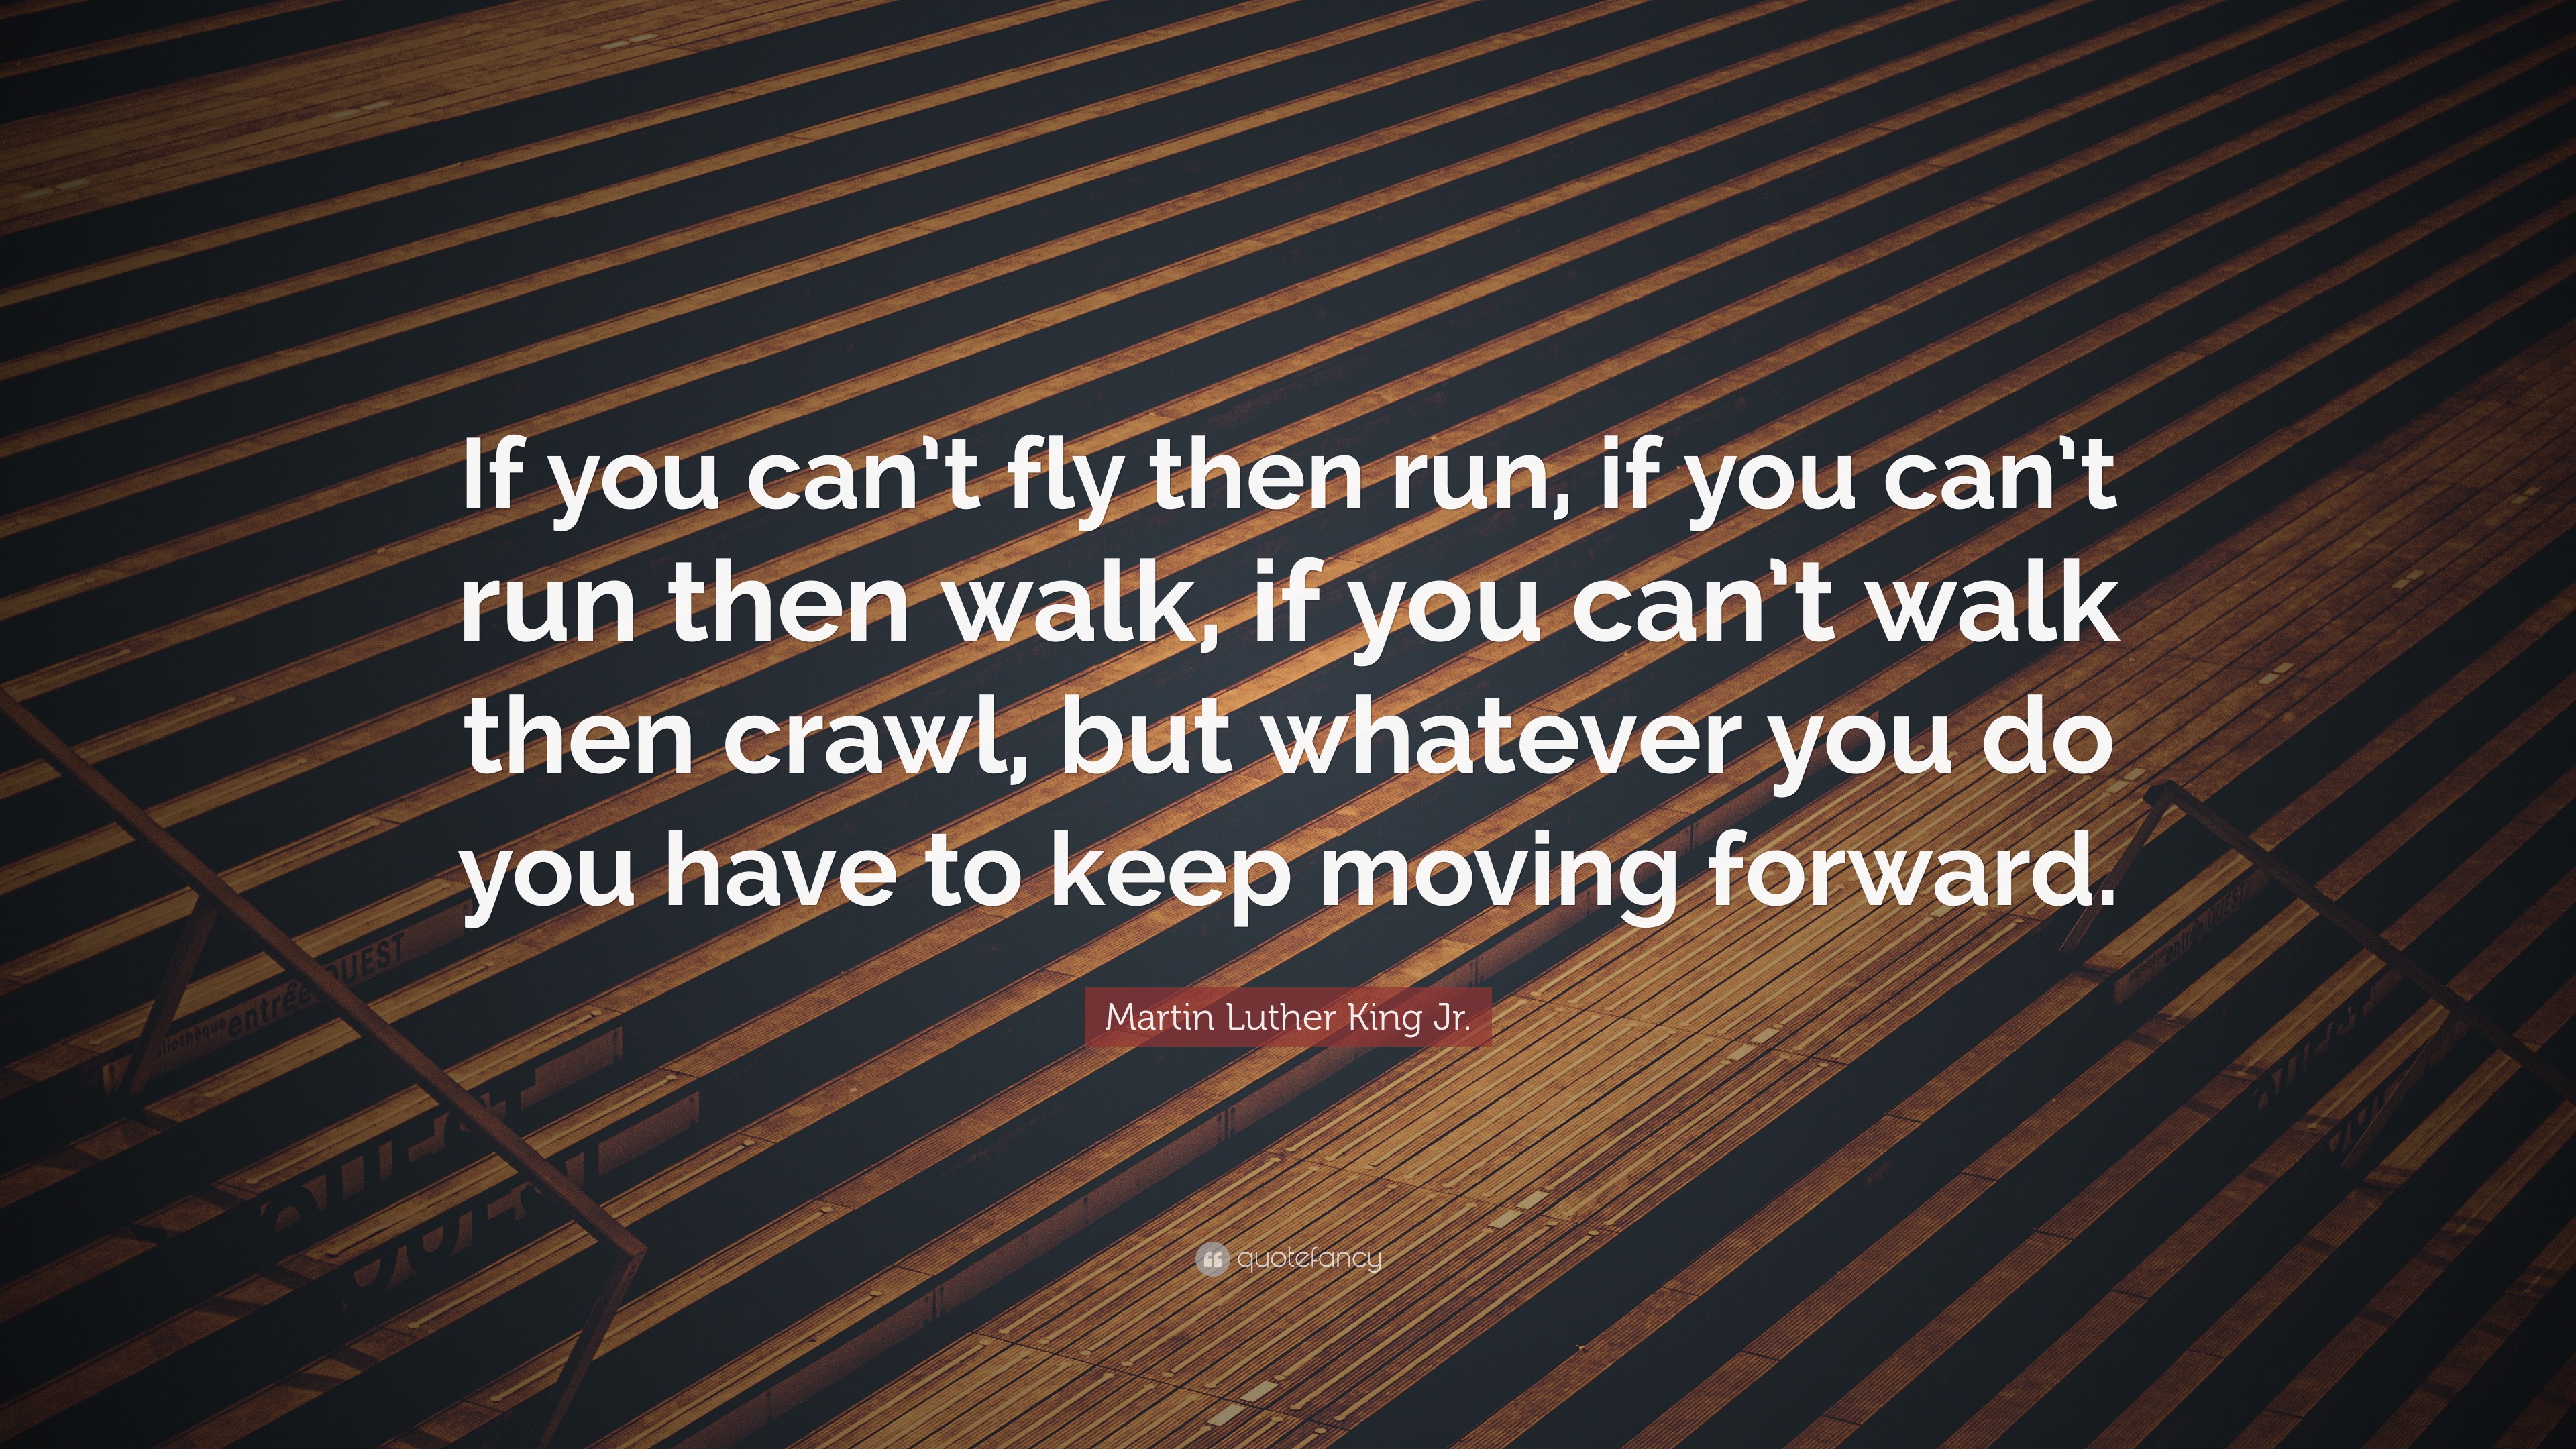 TOP 25 LEARN TO FLY QUOTES